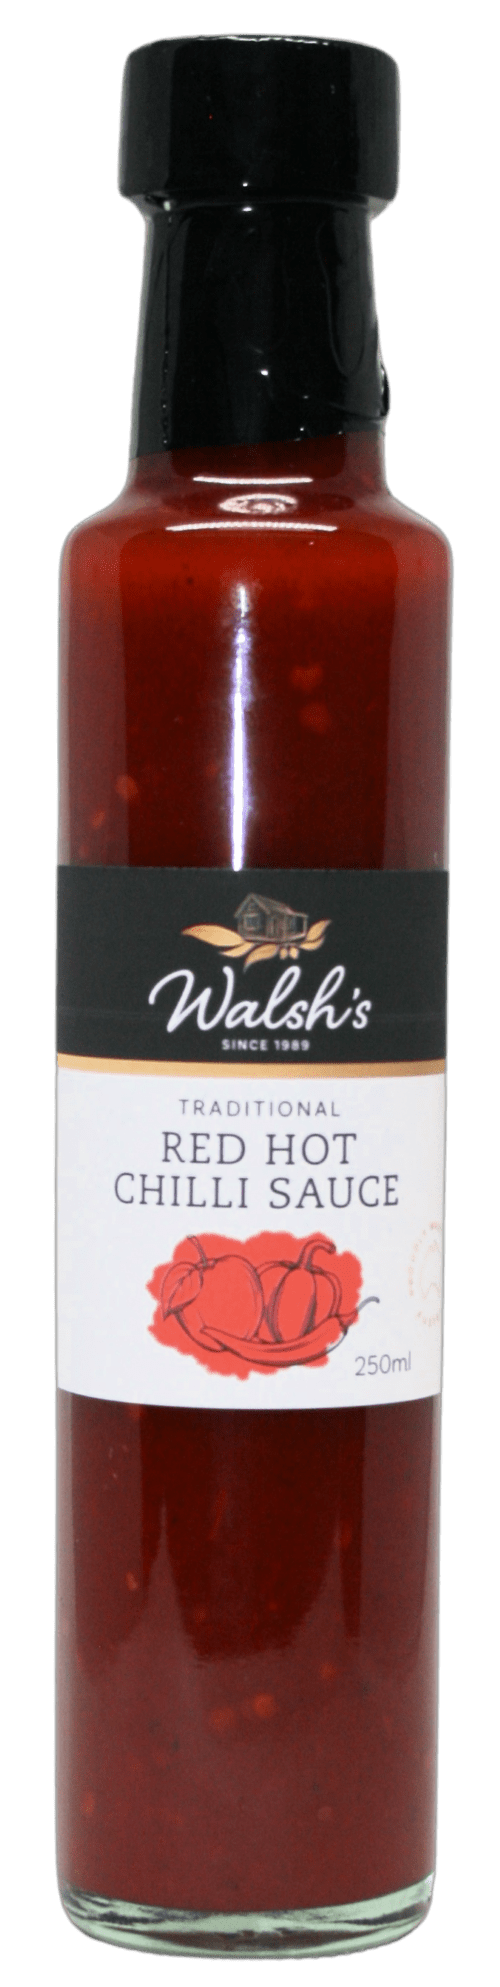 Walshs Red Hot Chilli Sauce